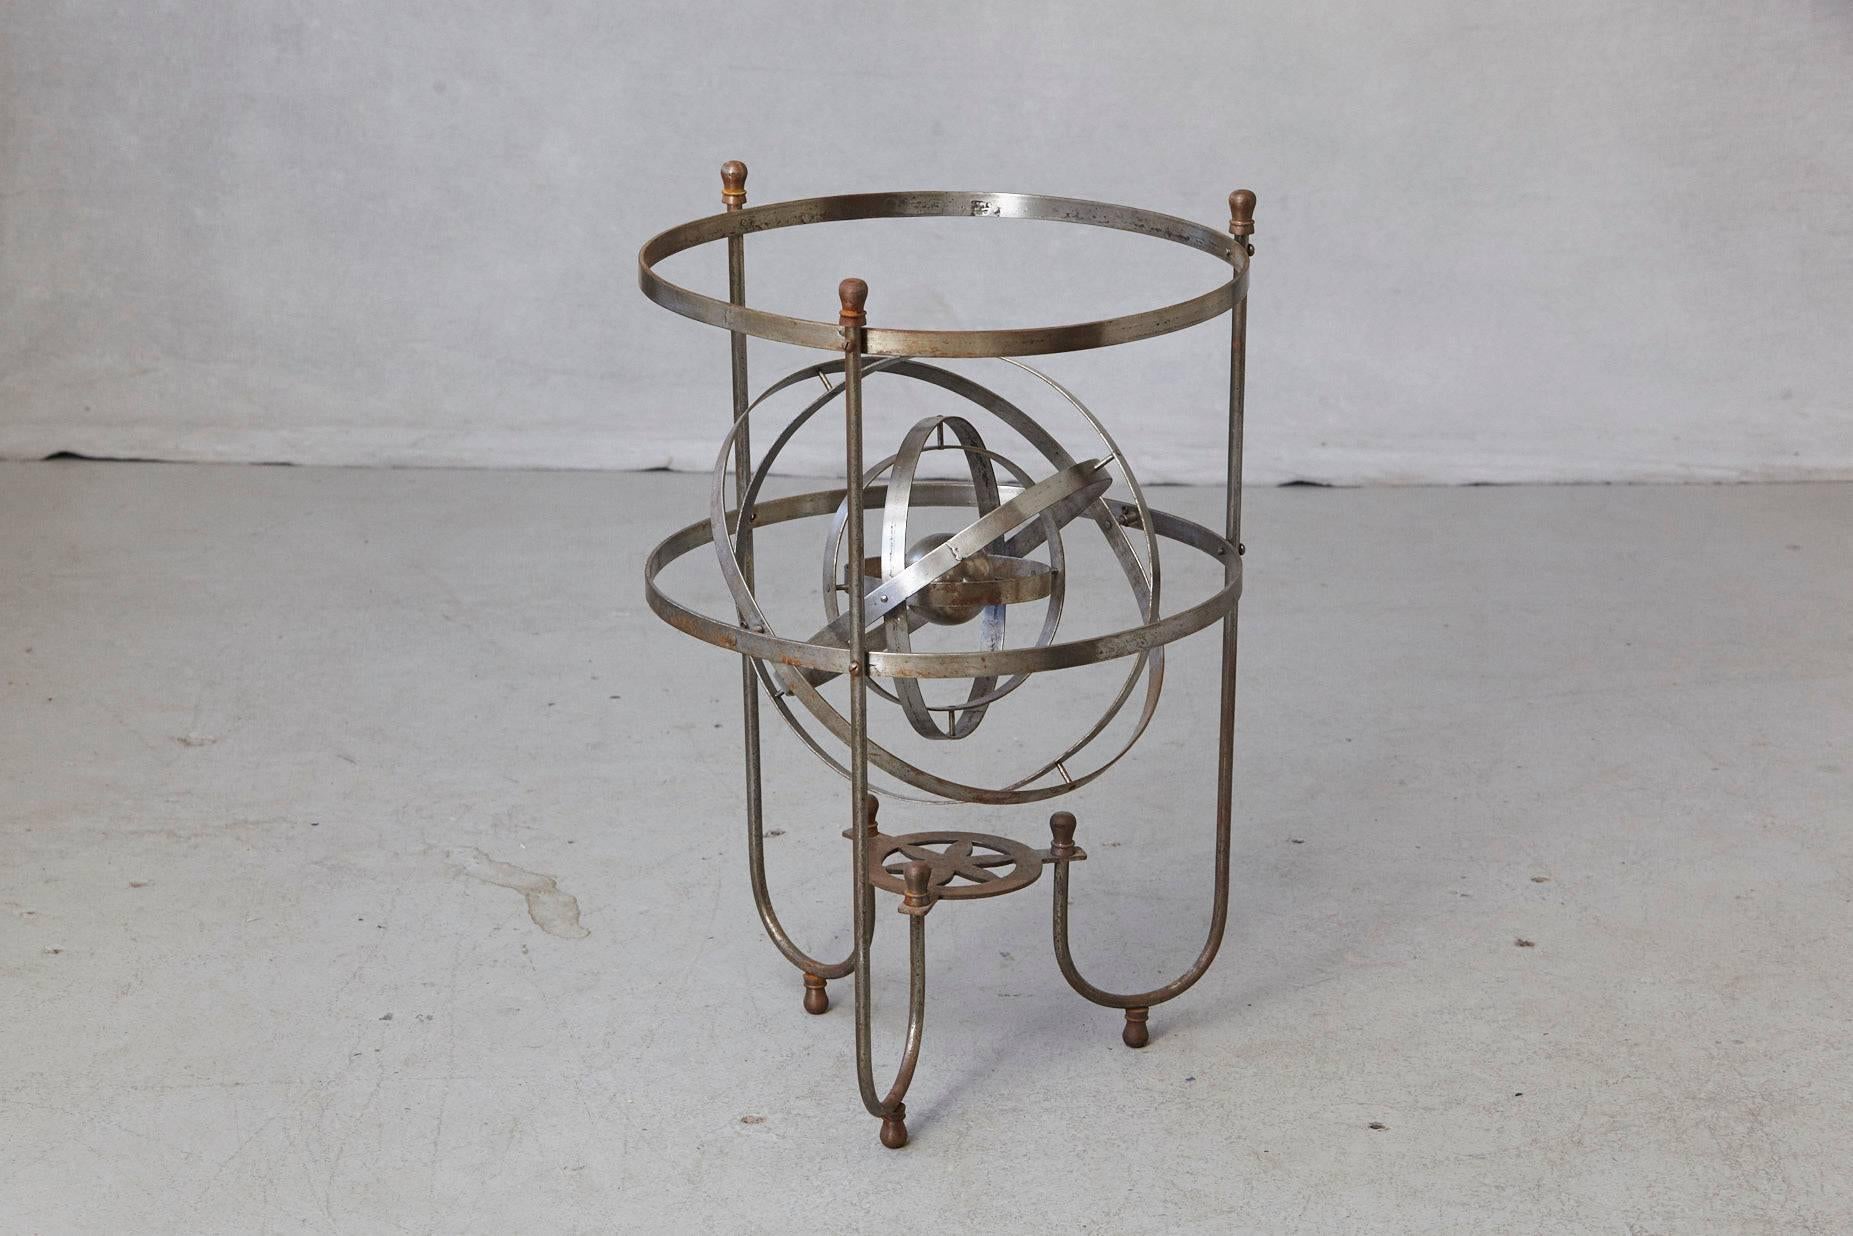 Steel Rare Kinetic Side Table with Revolving Orbital Motion, England, 1930s